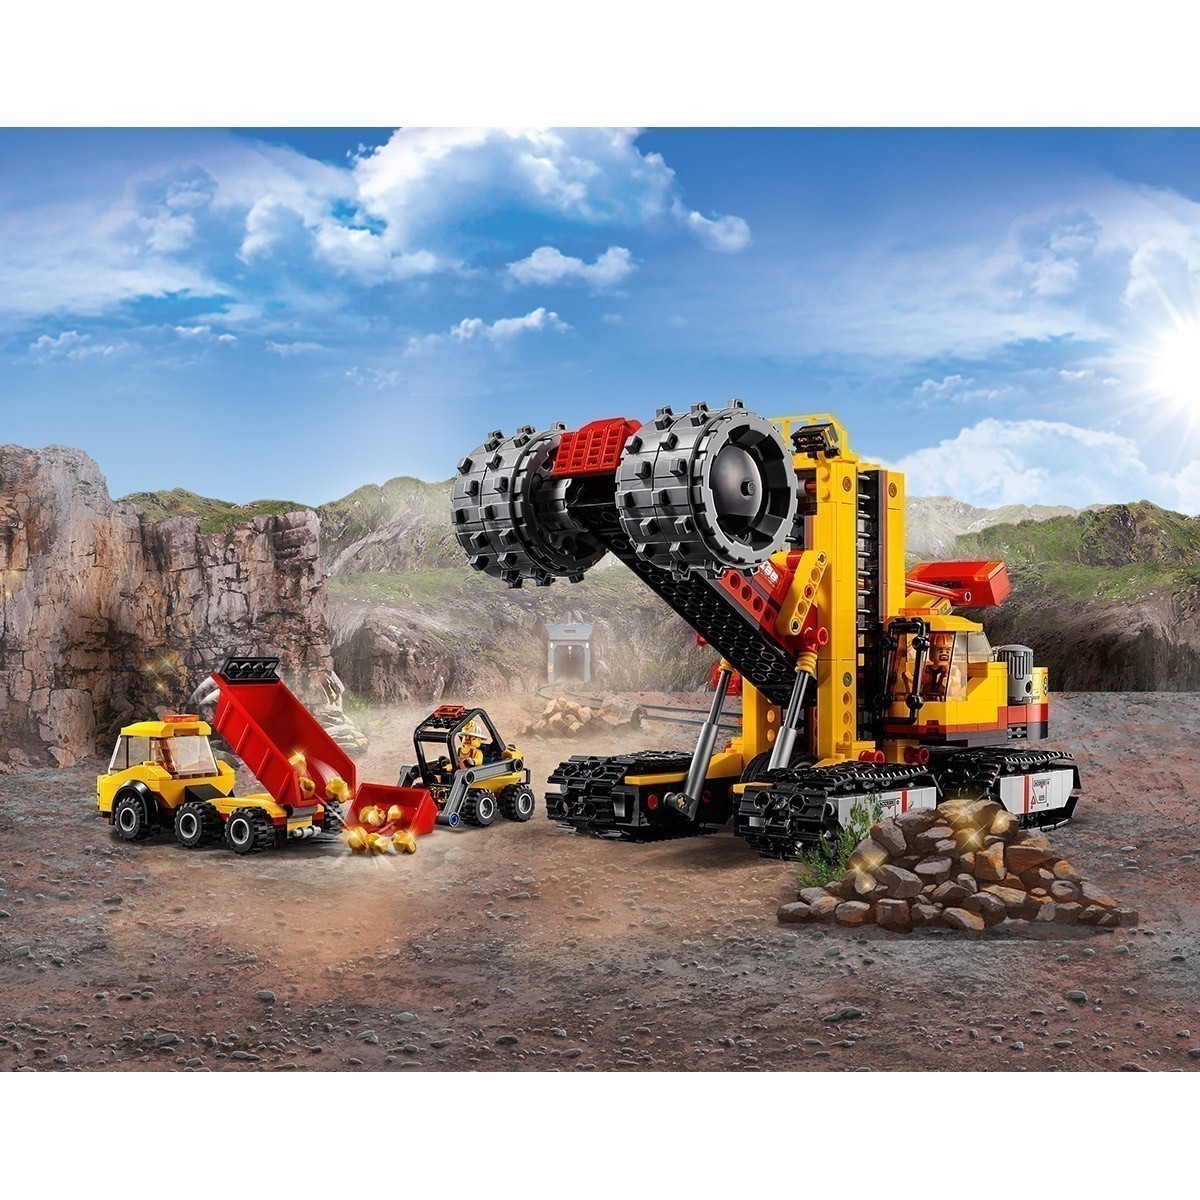 LEGO® City - 60188 Mining Experts Site